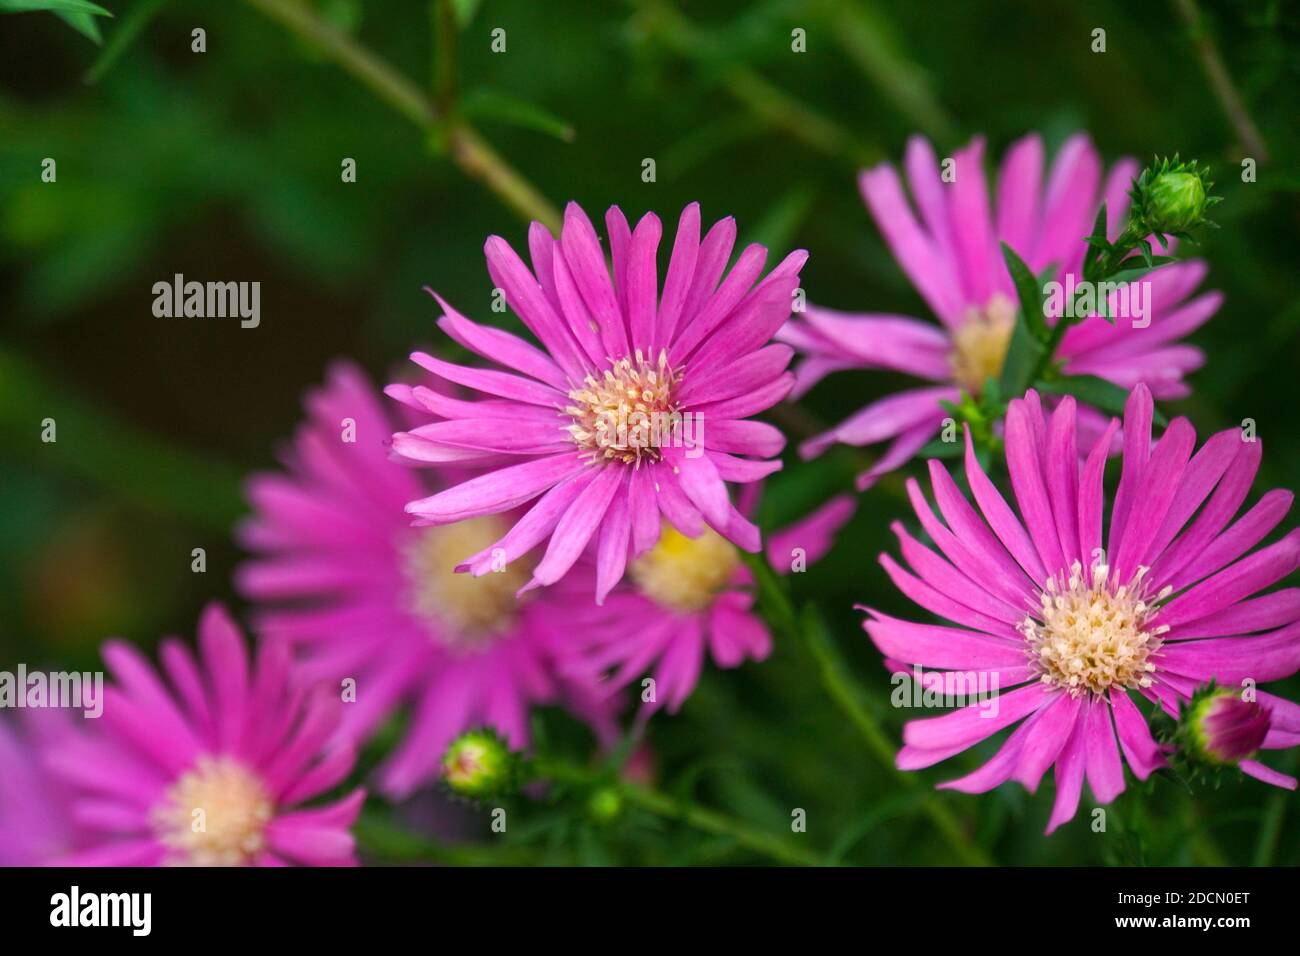 Close up of purple aster flowers in full bloom, with blurred green background. Stock Photo